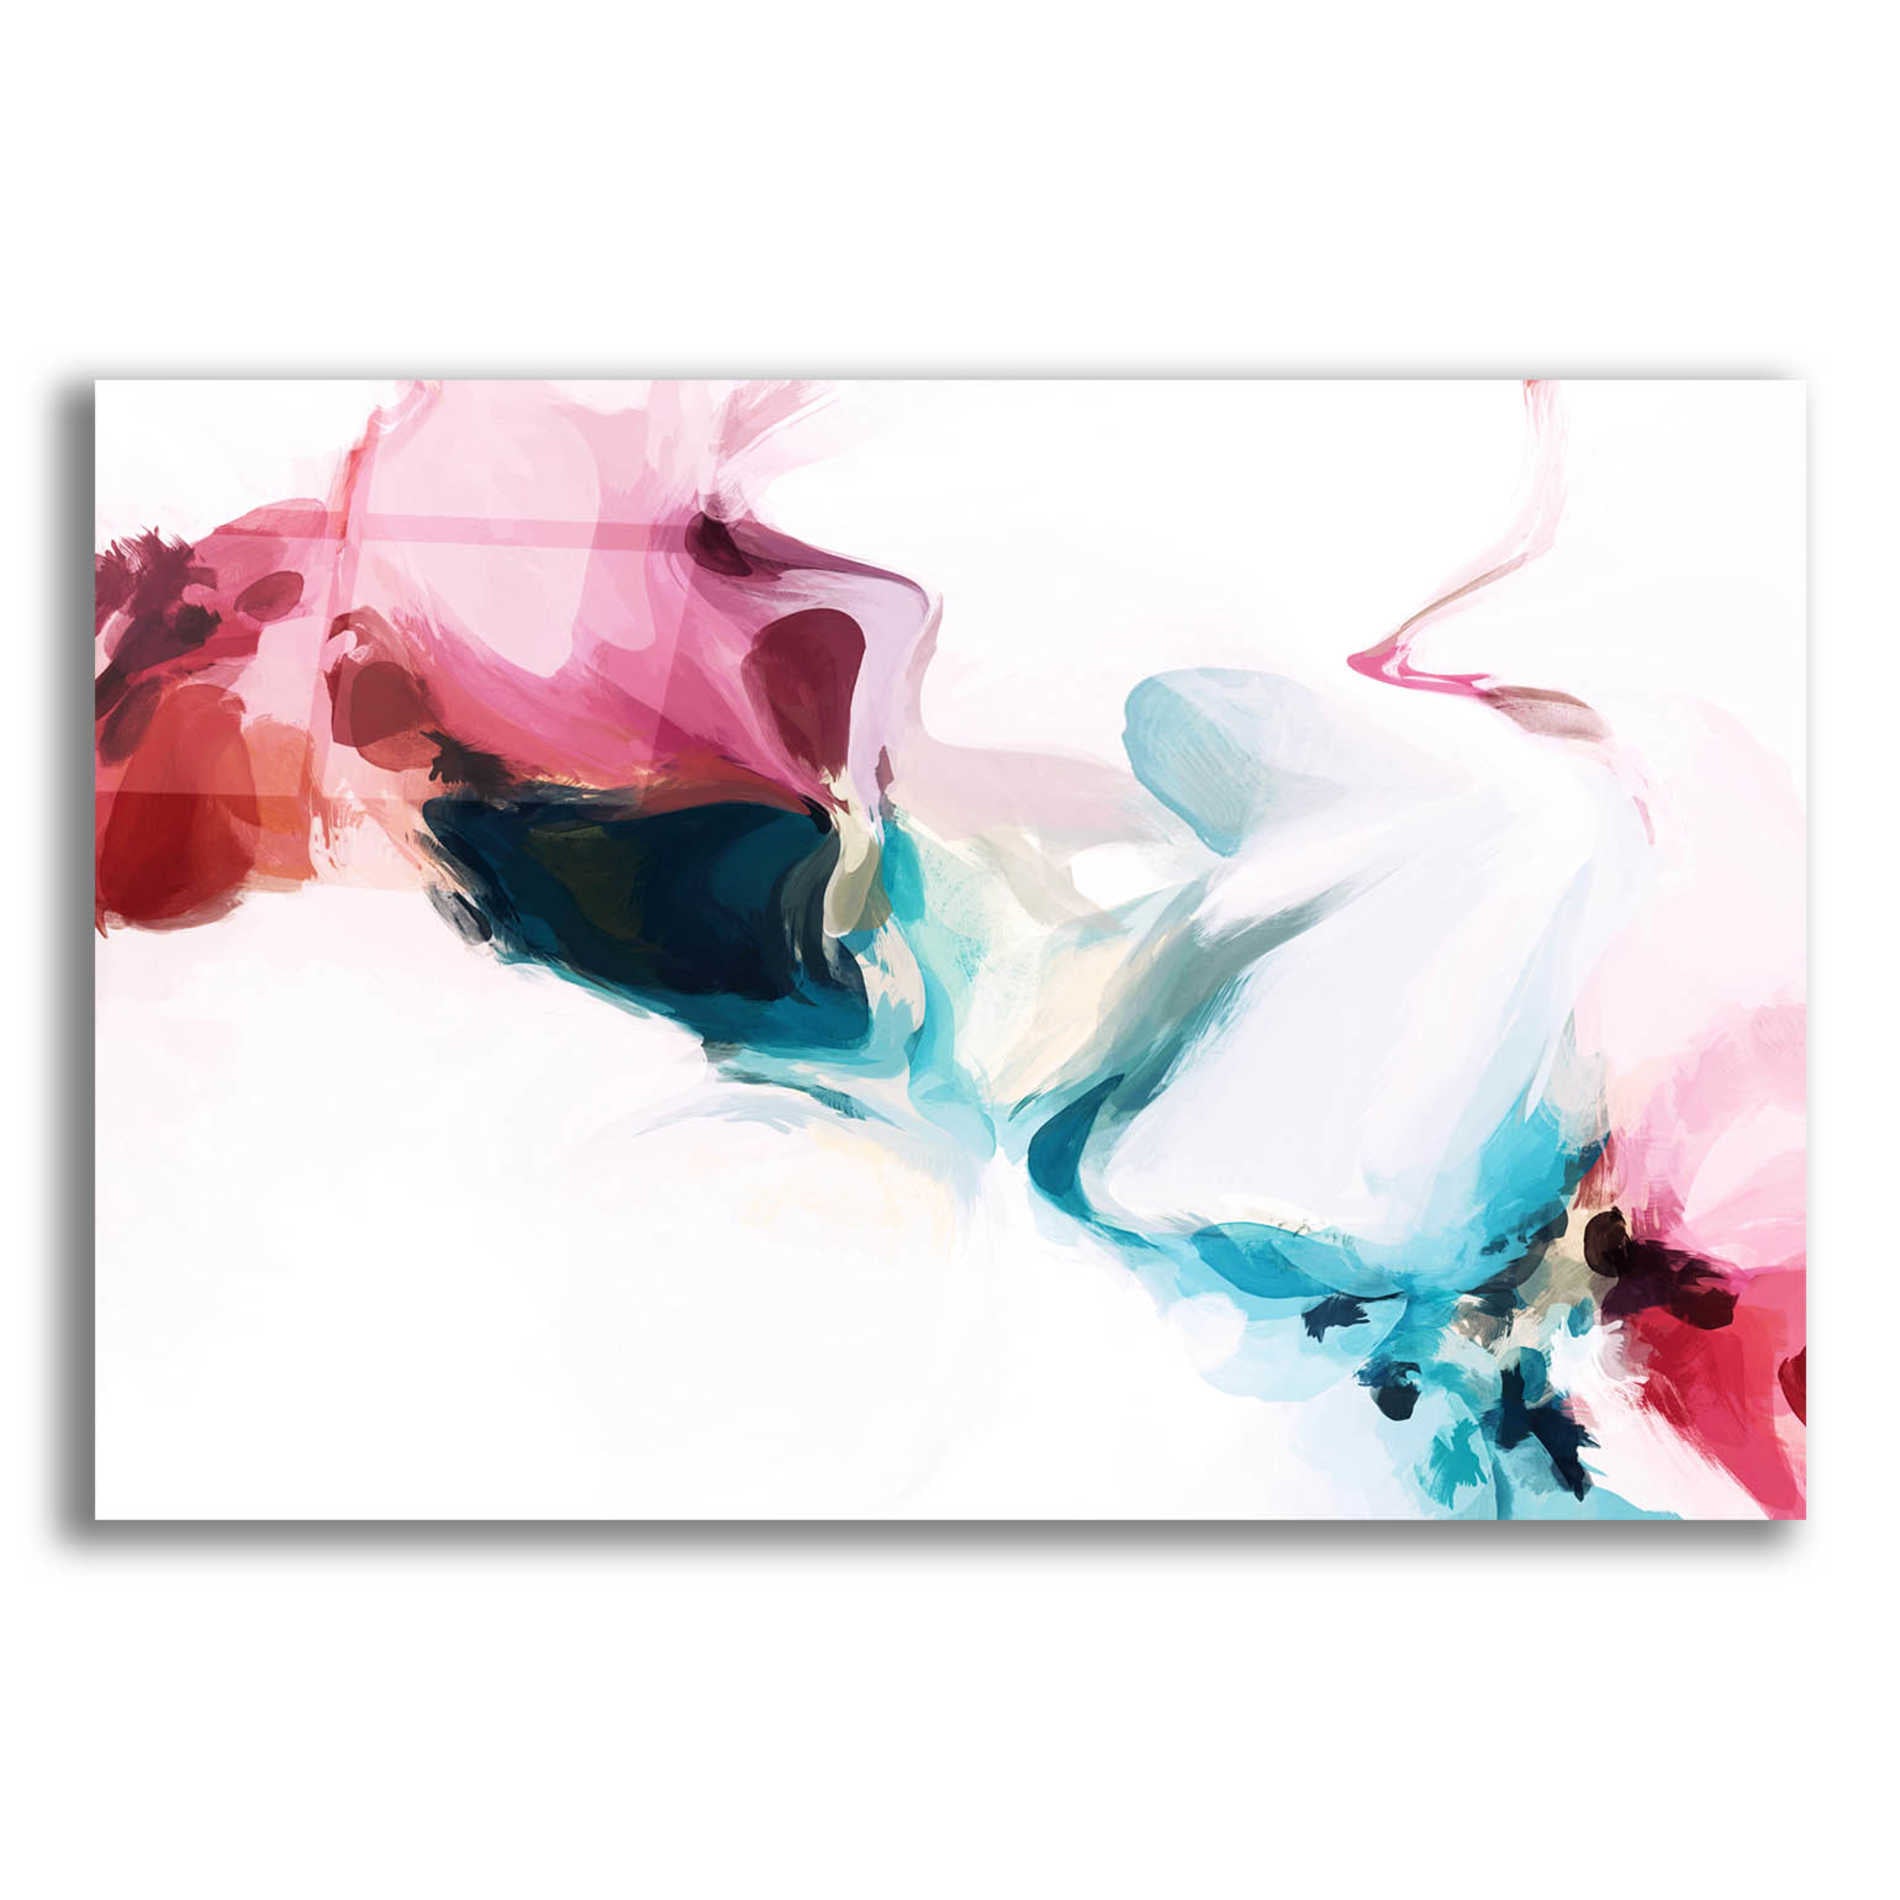 Epic Art 'Abstract Colorful Flows 18' by Irena Orlov Acrylic Glass Wall Art,24x16